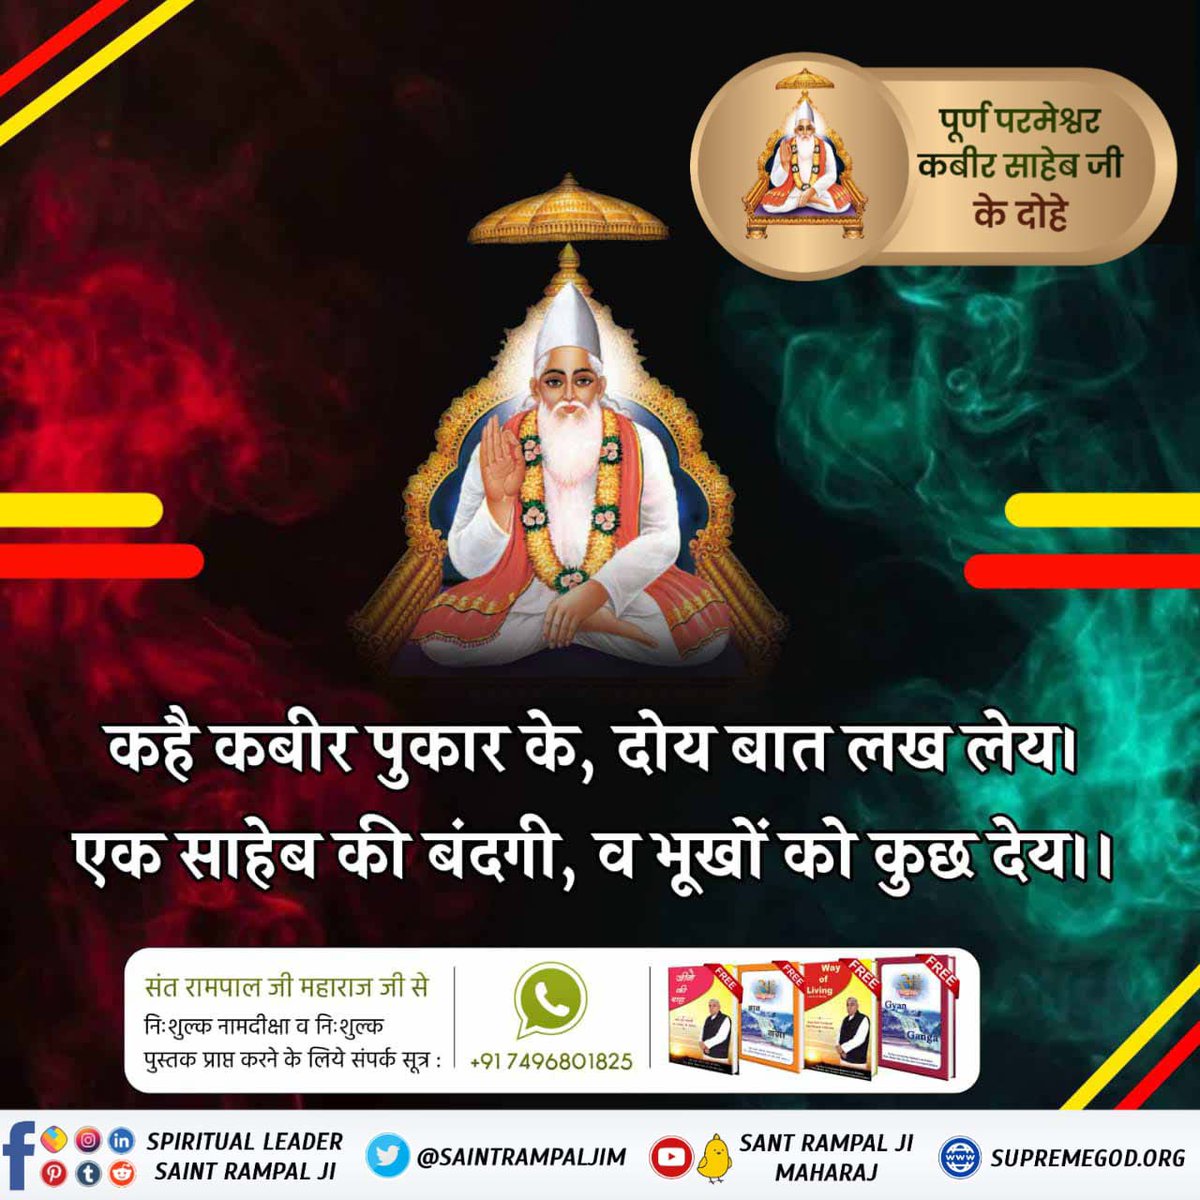 #परमात्माकबीरकी_वाणी_एकमंत्र के समान है One did not spend any money on charity andmeritorious deeds, and accumulated millions and billions ofrupees. While leaving this world, not even a single penny will go with you. #GodMornimgTuesday